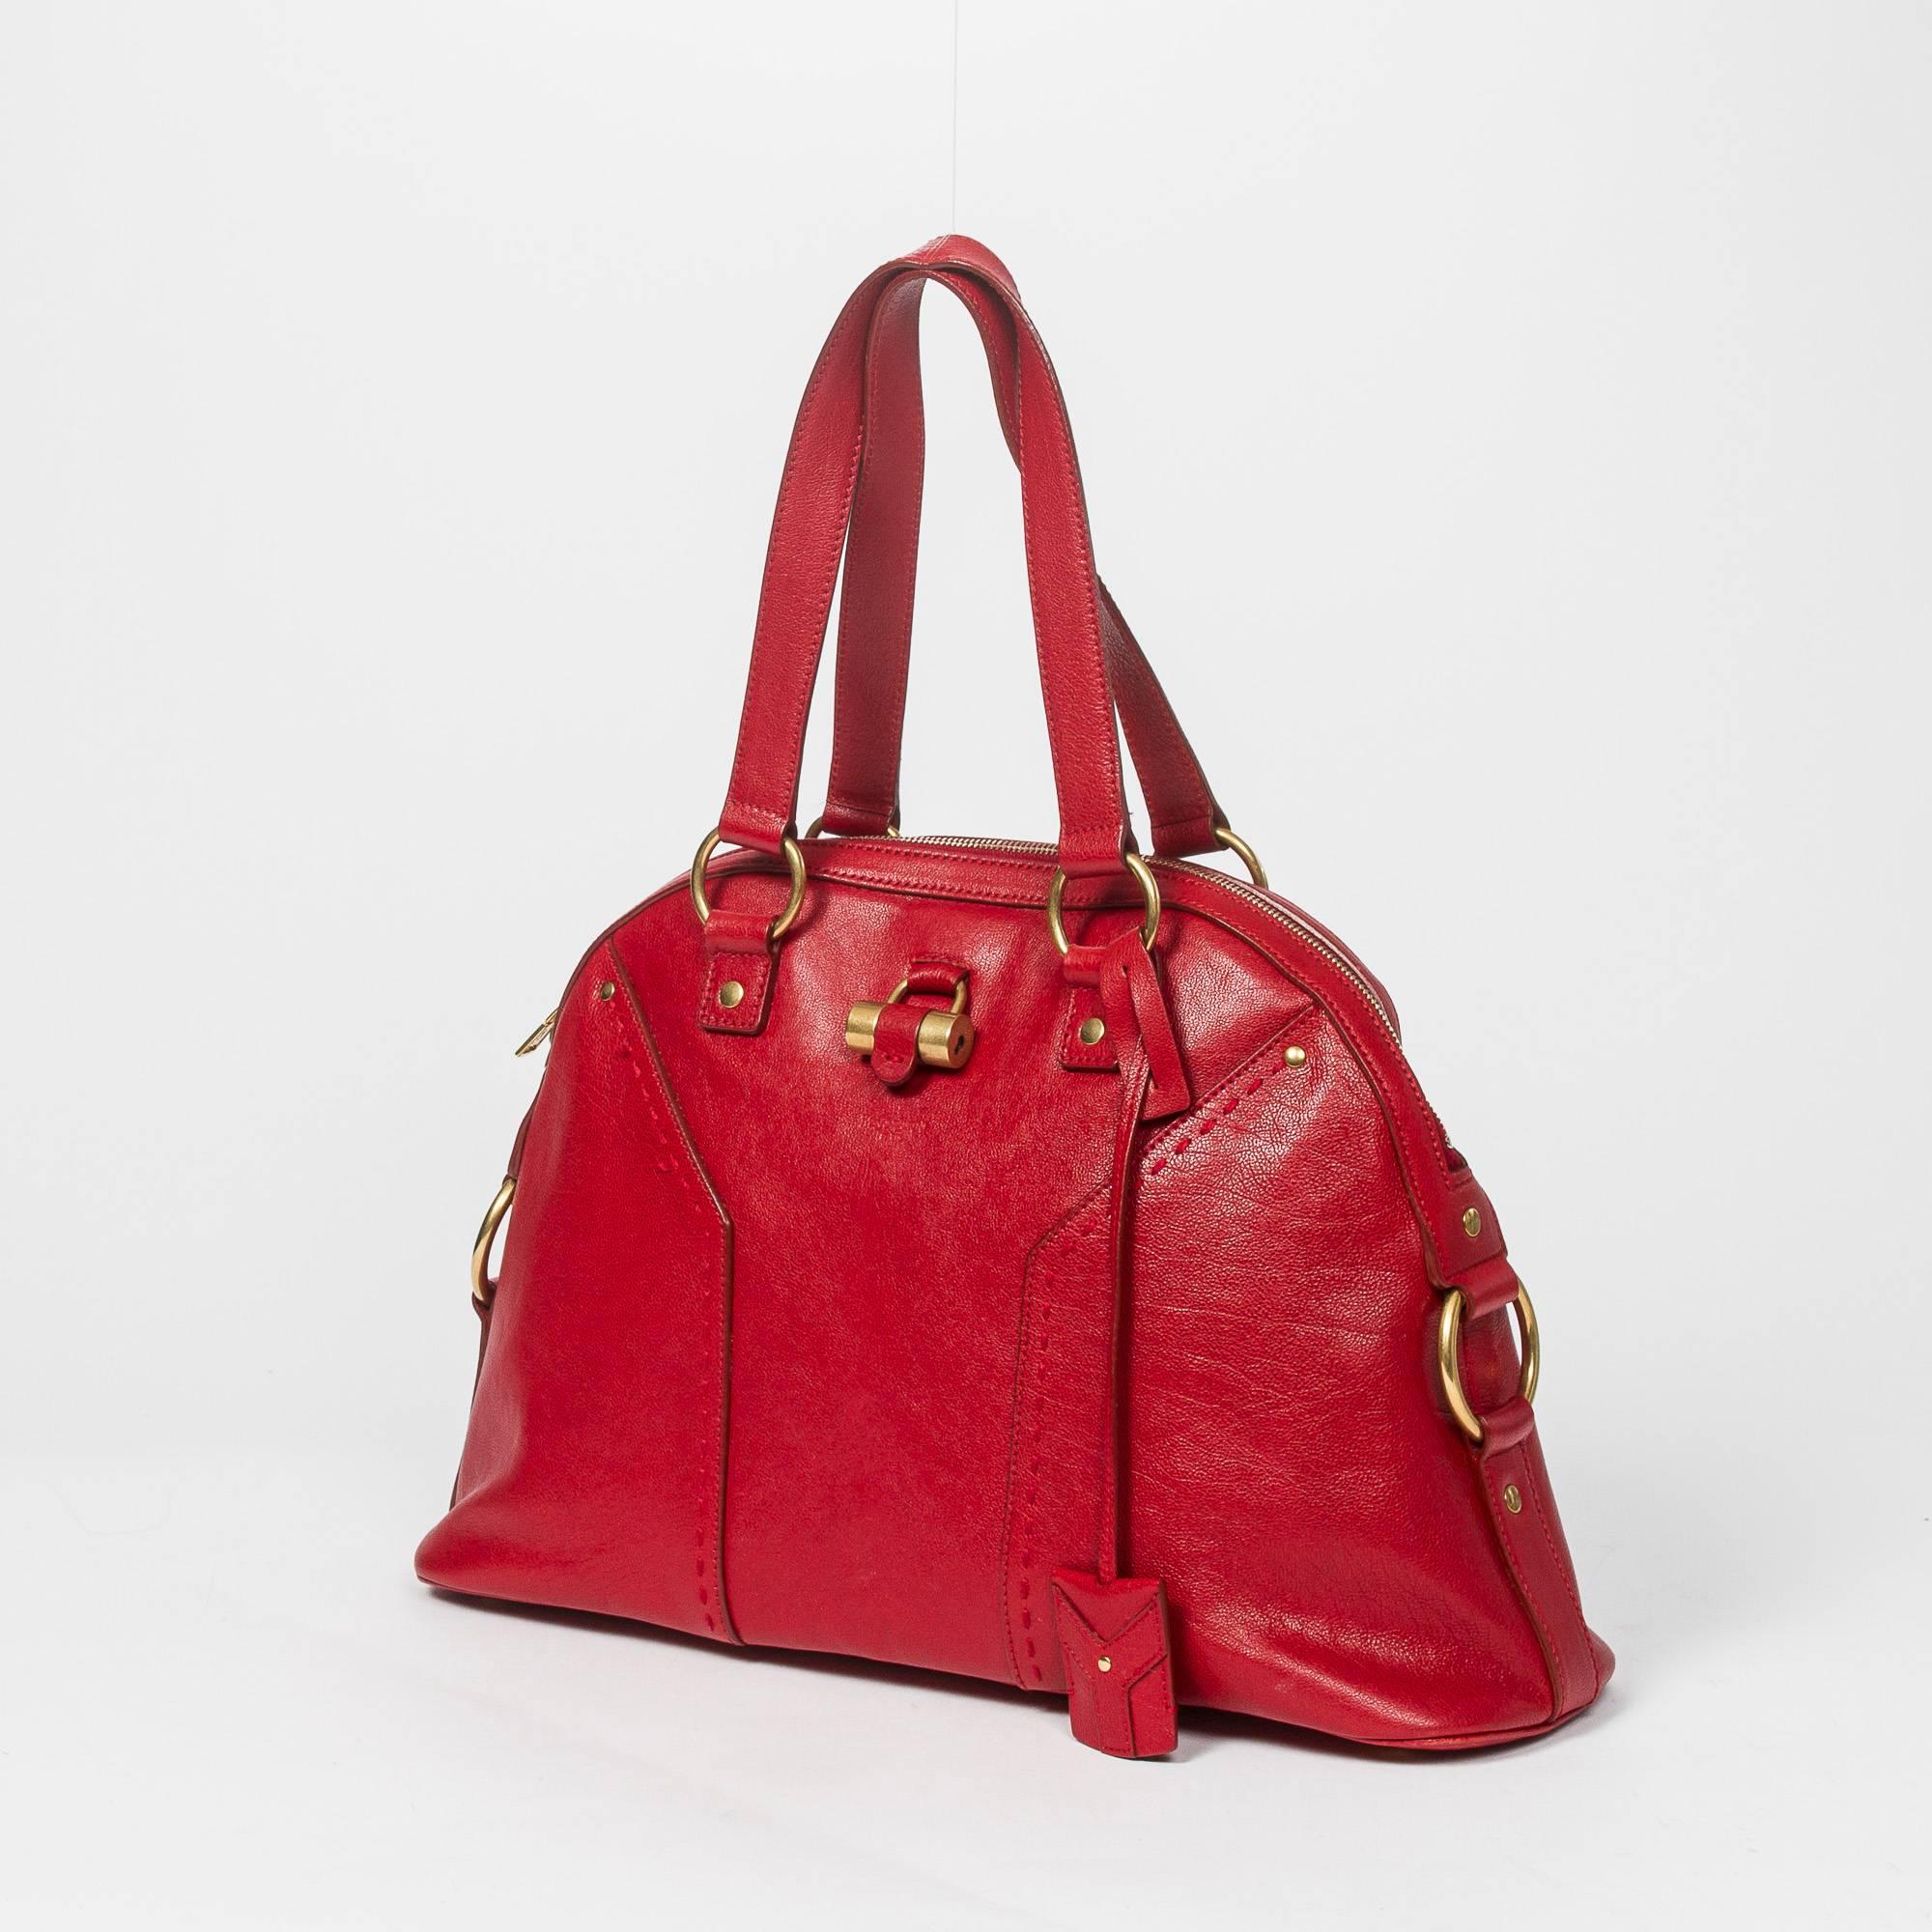 Muse 1 in Red calf leather, with Red leather handles, gold hardware. Key and Clochette, Dustbag included. Excellent condition.